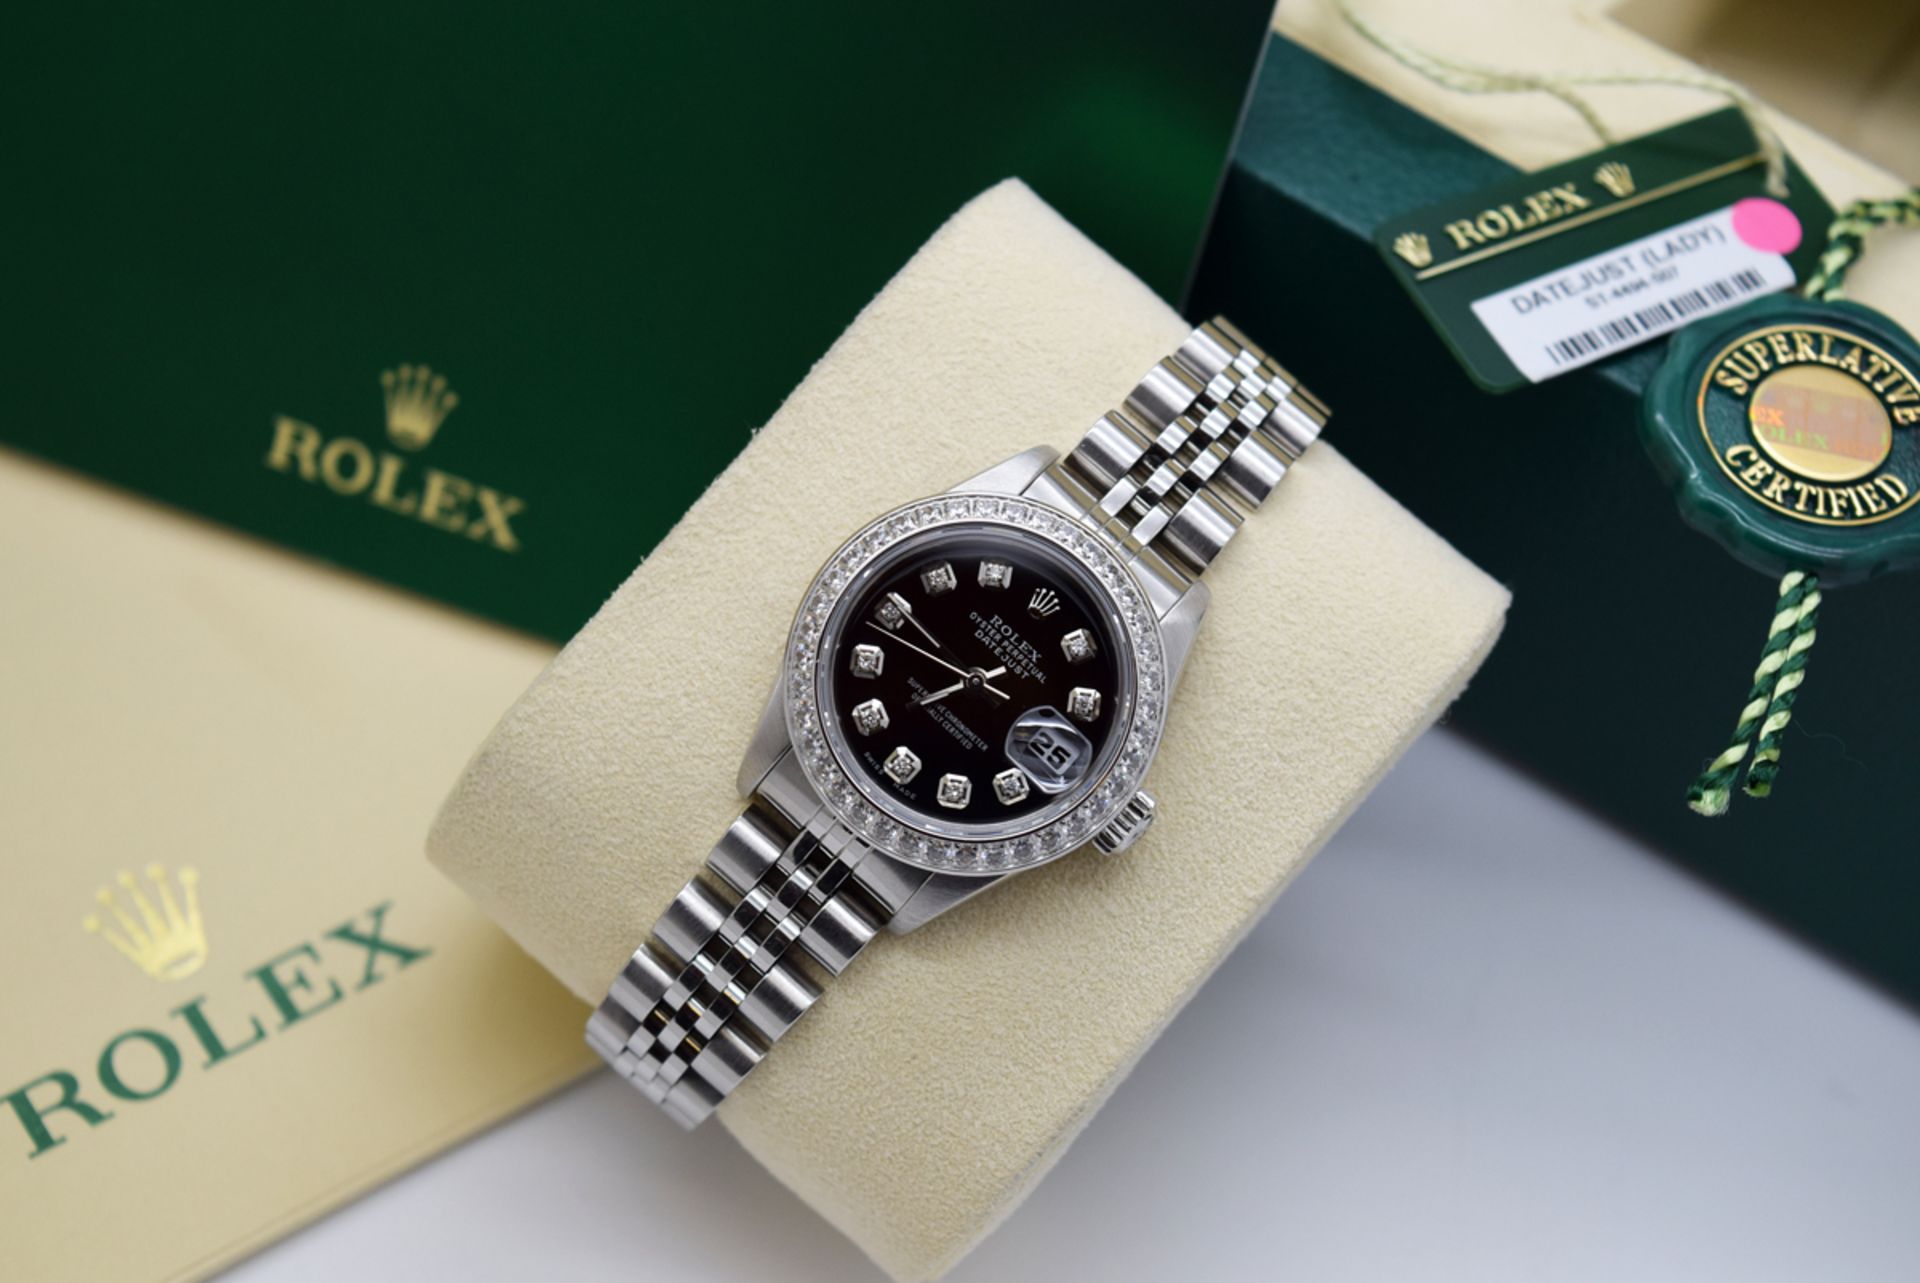 ROLEX LADY DATEJUST (26mm) - STAINLESS STEEL with a DIAMOND BLACK DIAL - Image 9 of 9